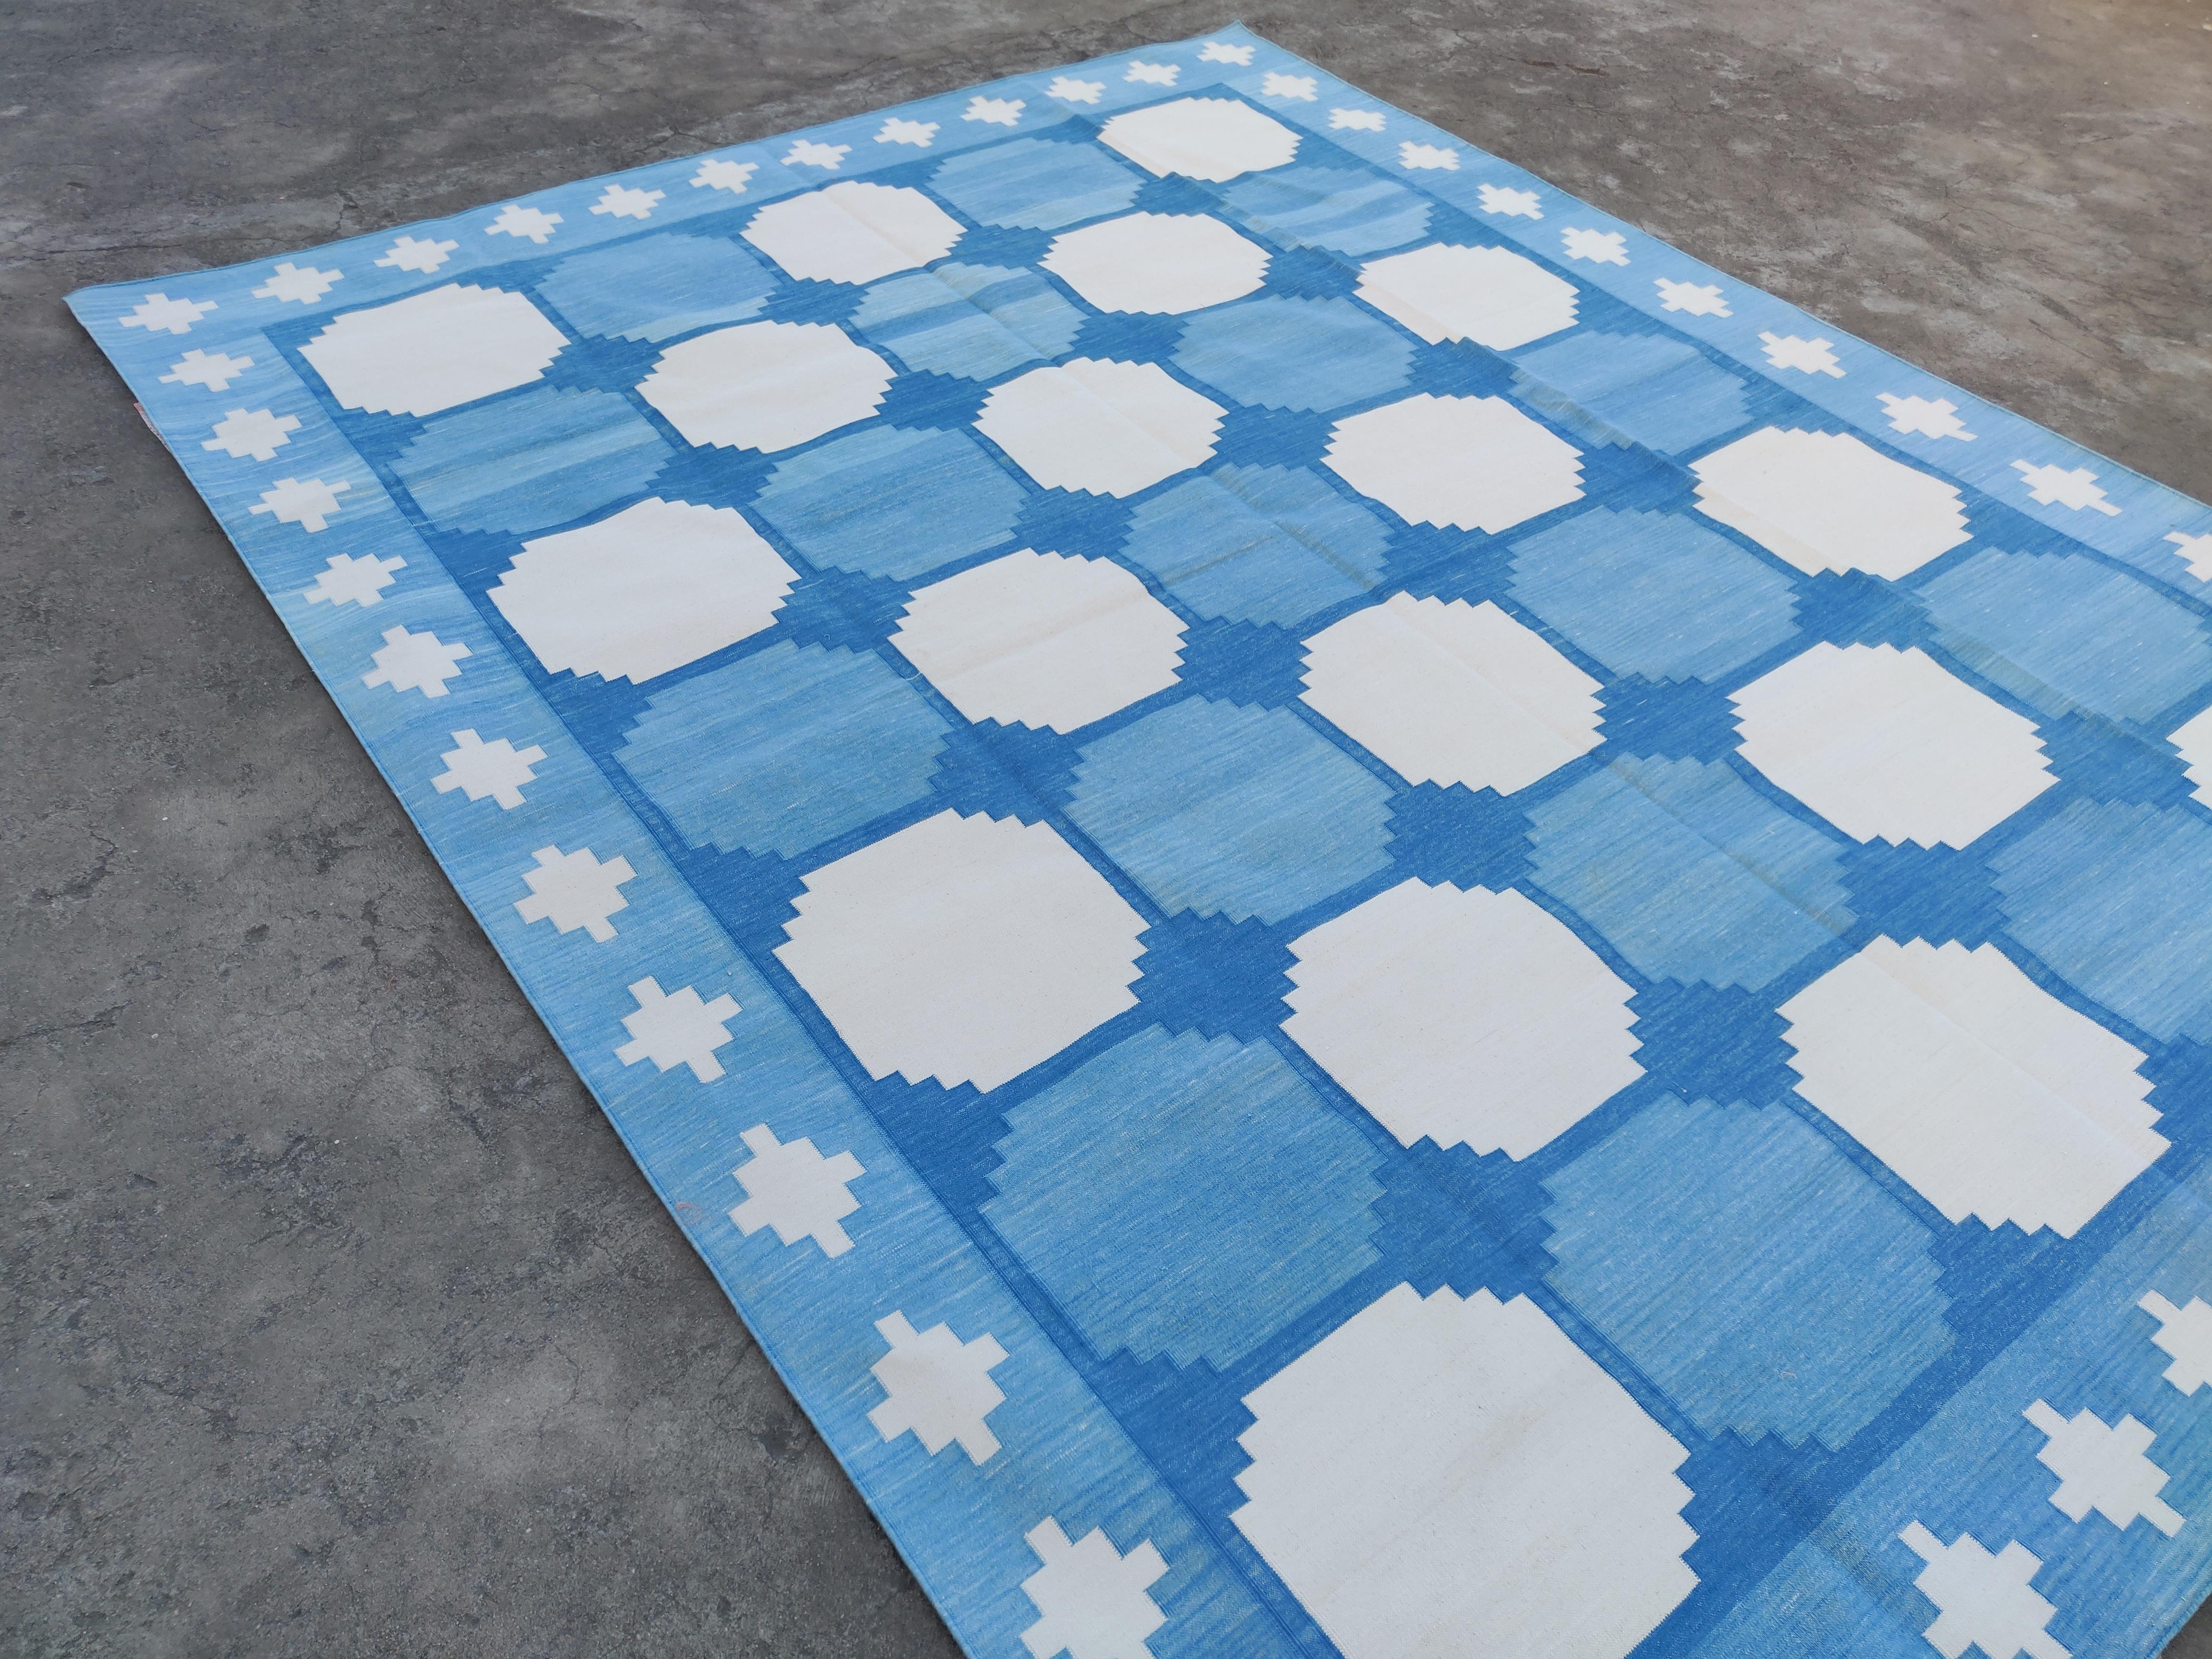 Contemporary Handmade Cotton Flat Weave Rug, 8x10 Blue And White Tile Pattern Indian Dhurrie For Sale